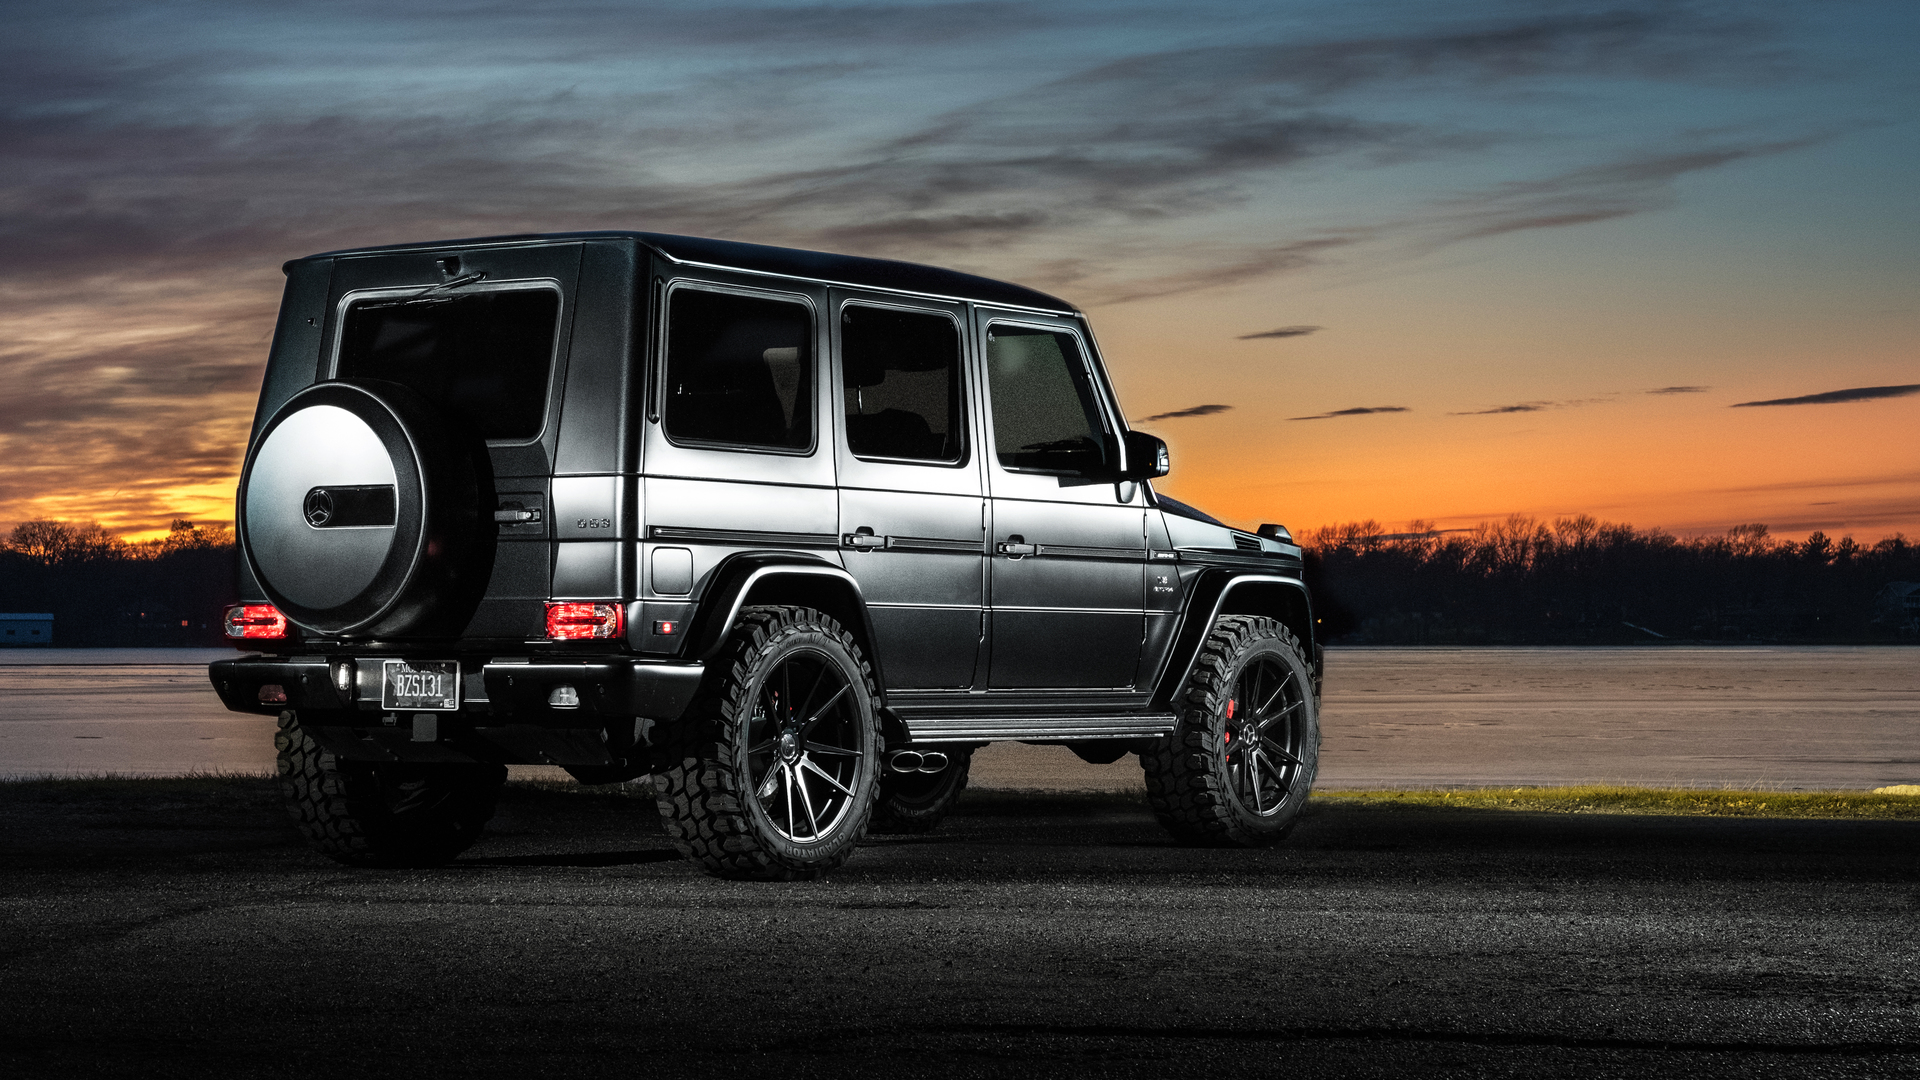 Mercedes AMG G63 Wallpapers - Wallpaper Cave